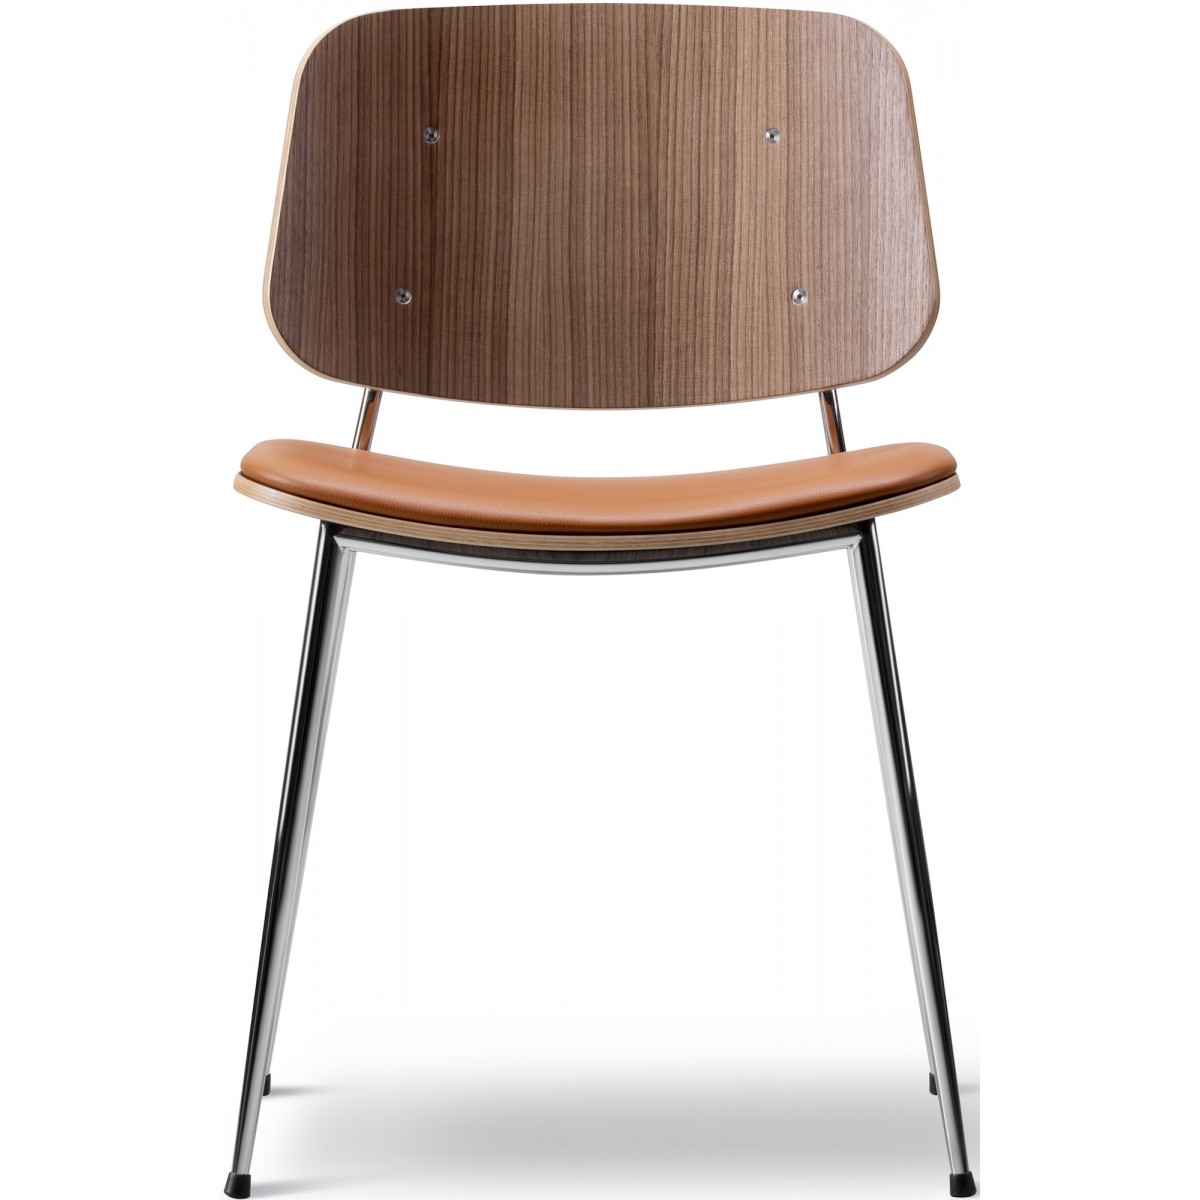 SOLD OUT Seat Upholstered – Omni 307 leather + lacquered walnut / chrome – 3061 Søborg chair (steel)